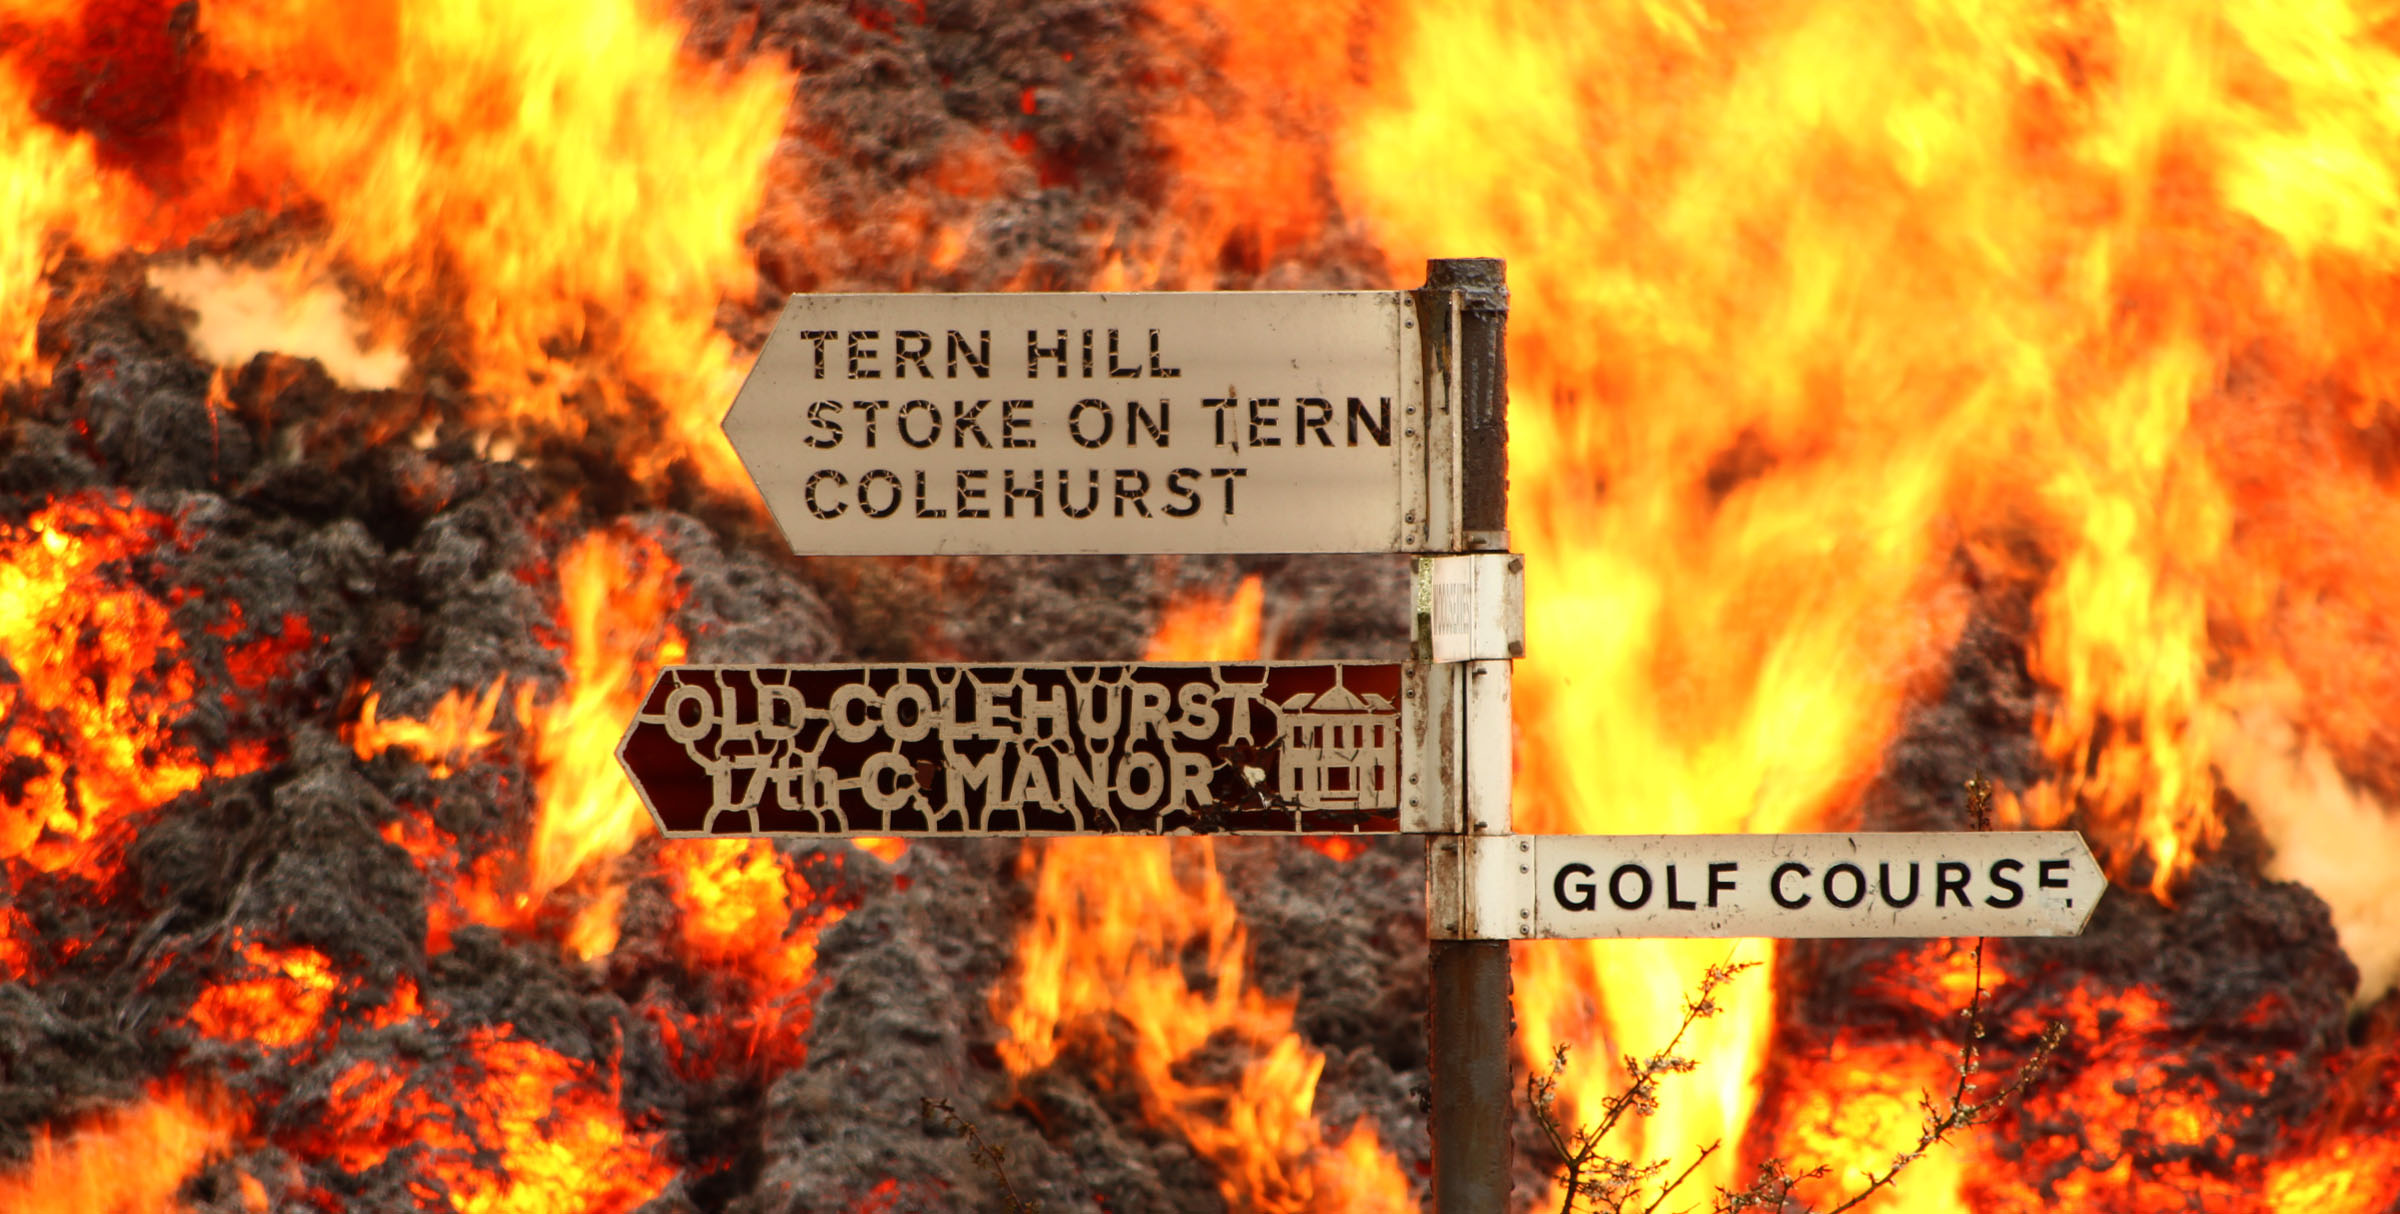 The fierce fire fought by firefighters even melted road signs